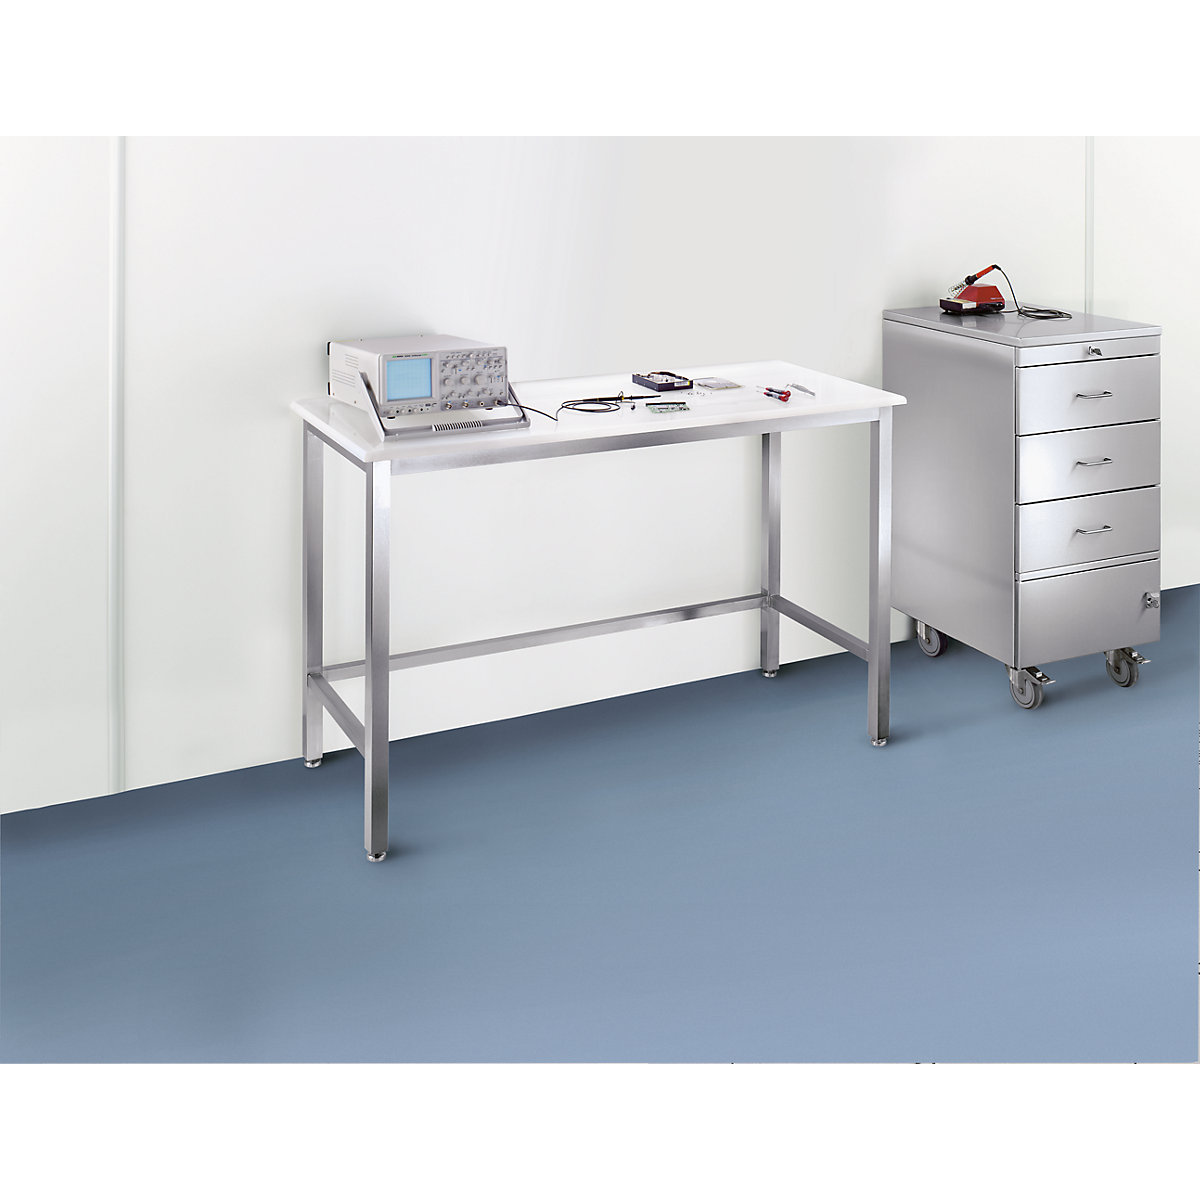 Stainless steel cleanroom table with polypropylene worktop